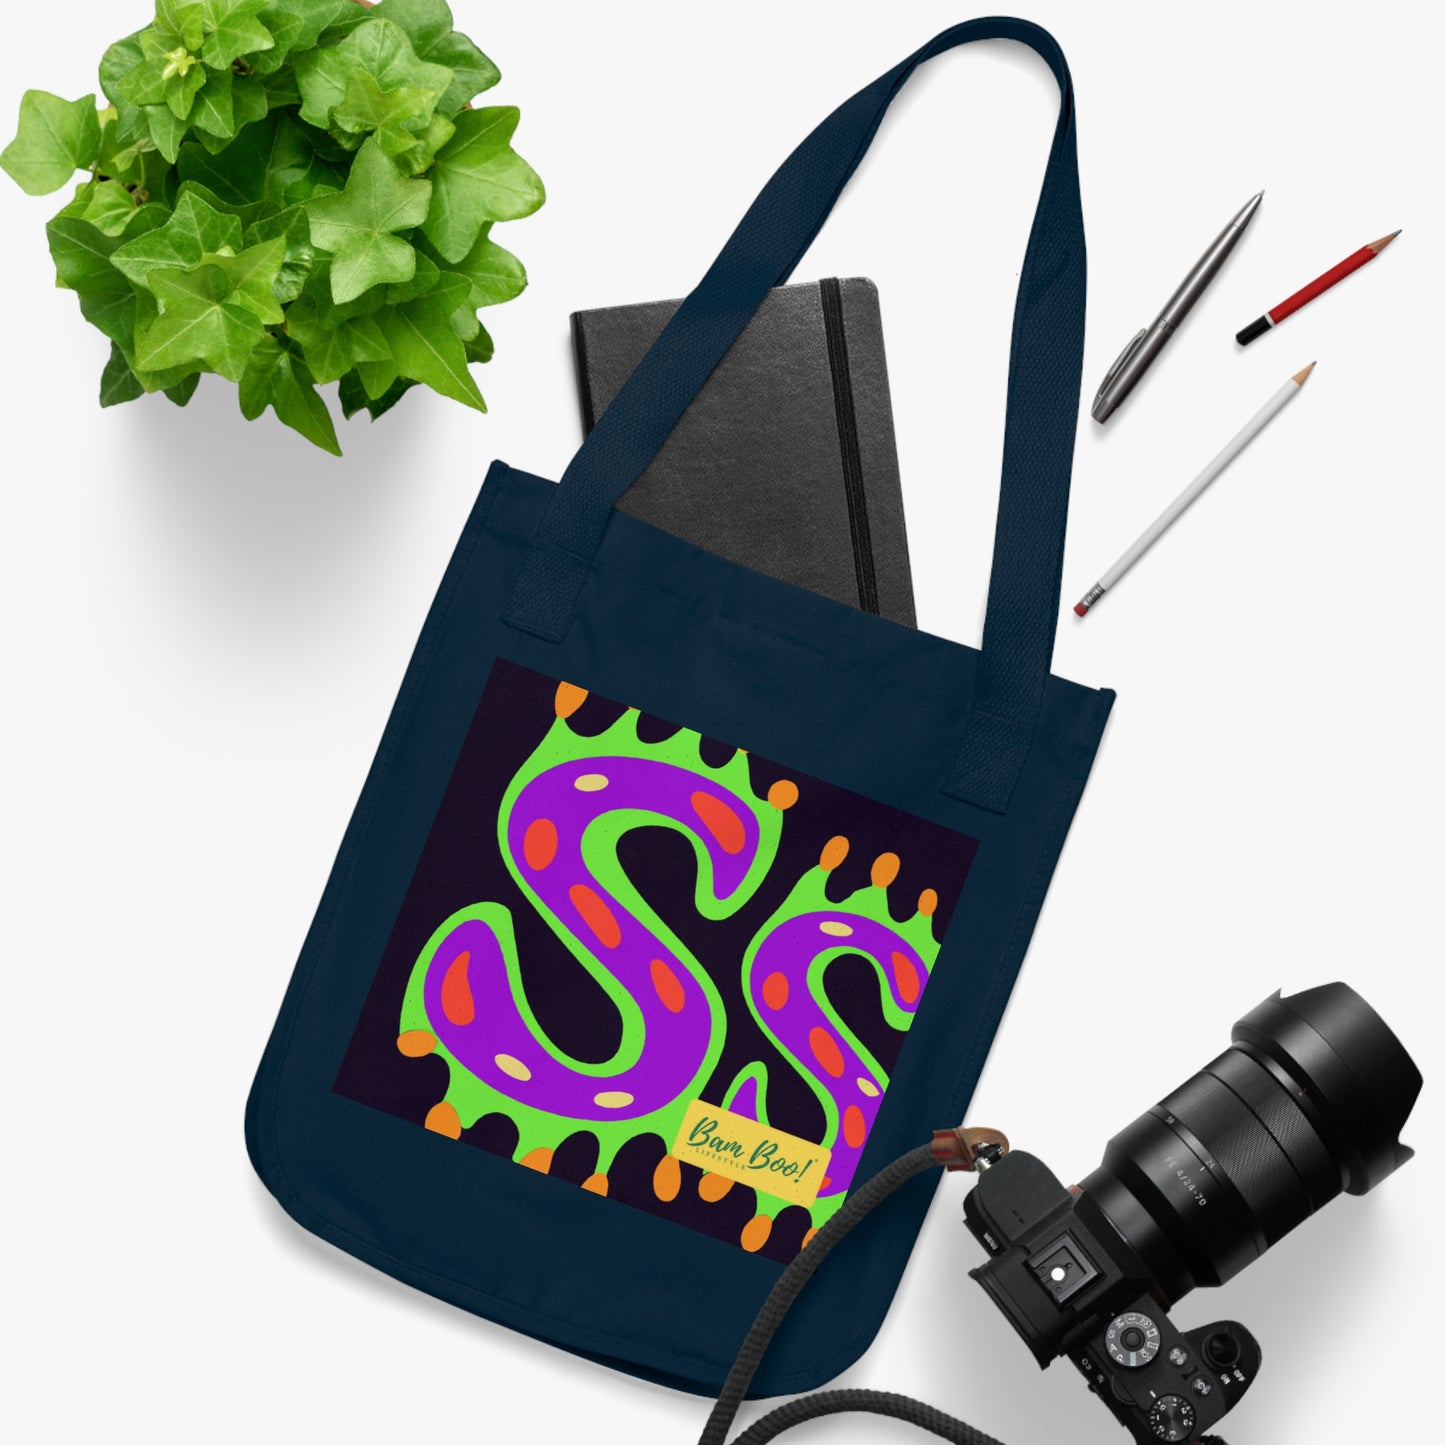 "The Swirling Spectrum of 'S' Shapes" - Bam Boo! Lifestyle Eco-friendly Tote Bag